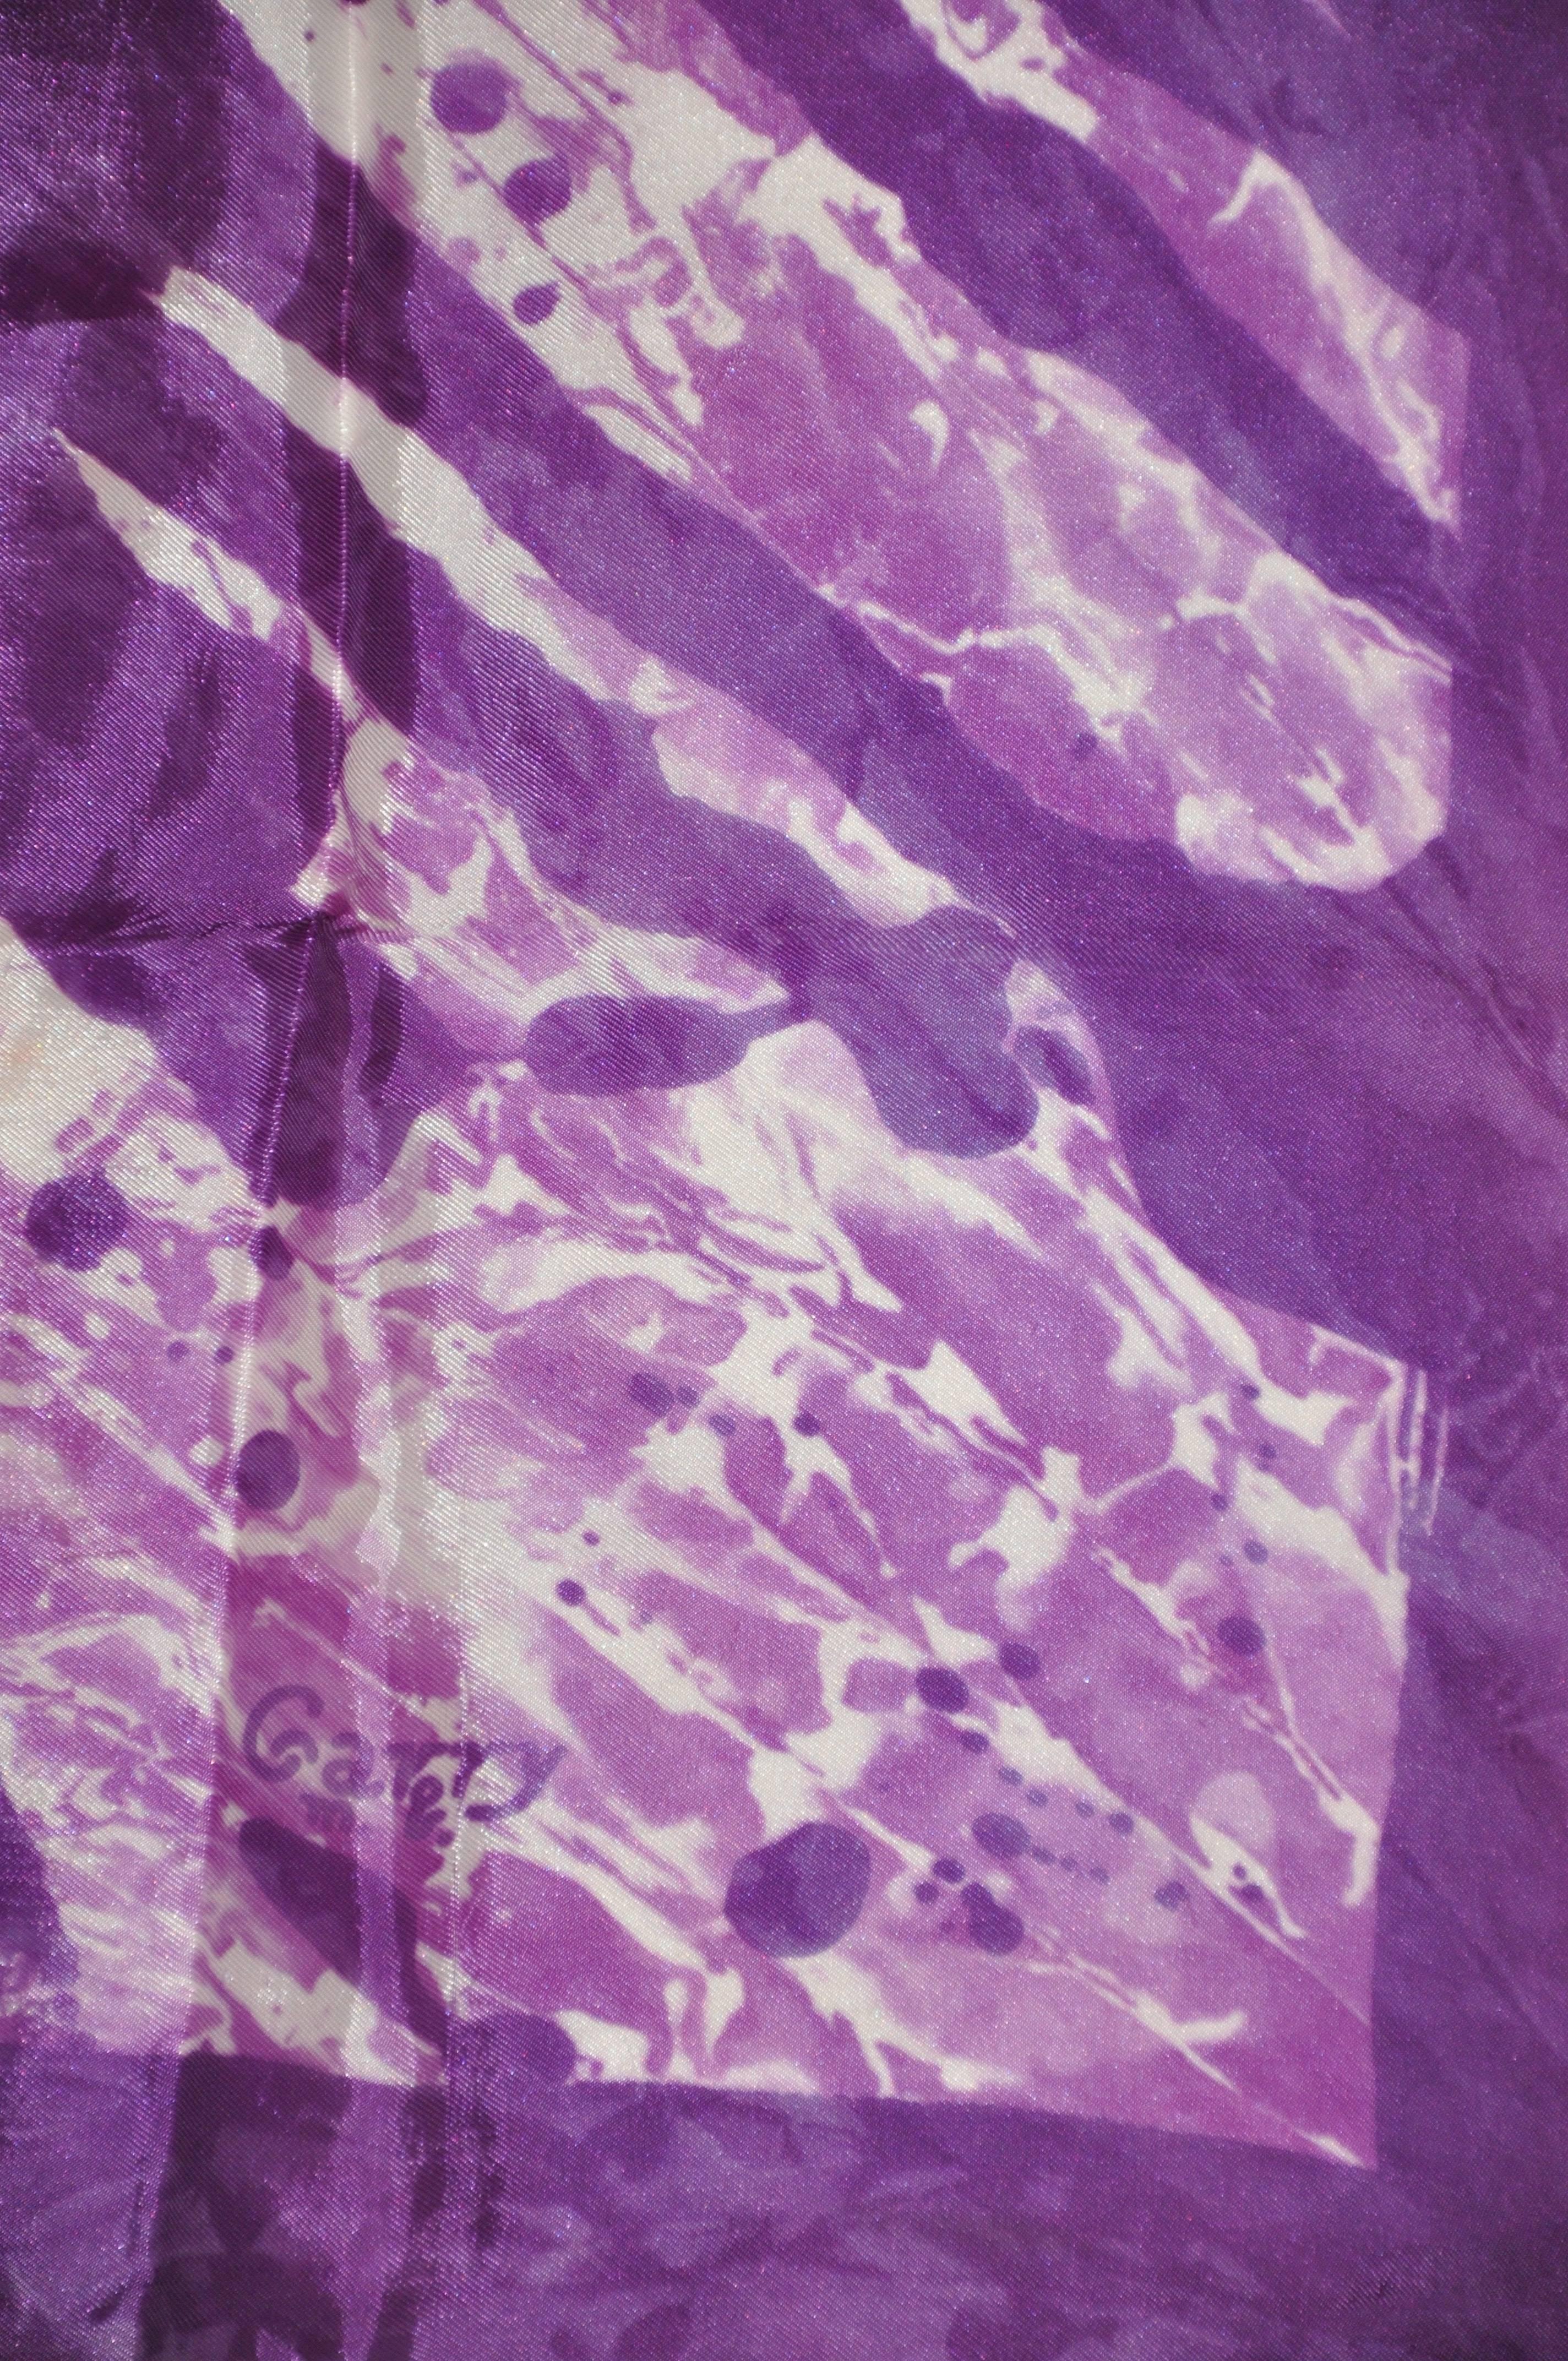 Purple, violet & white "tie dye" style scarf measures 26" x 27", finished with hand-rolled edges. Made of acetate, and made in Italy.